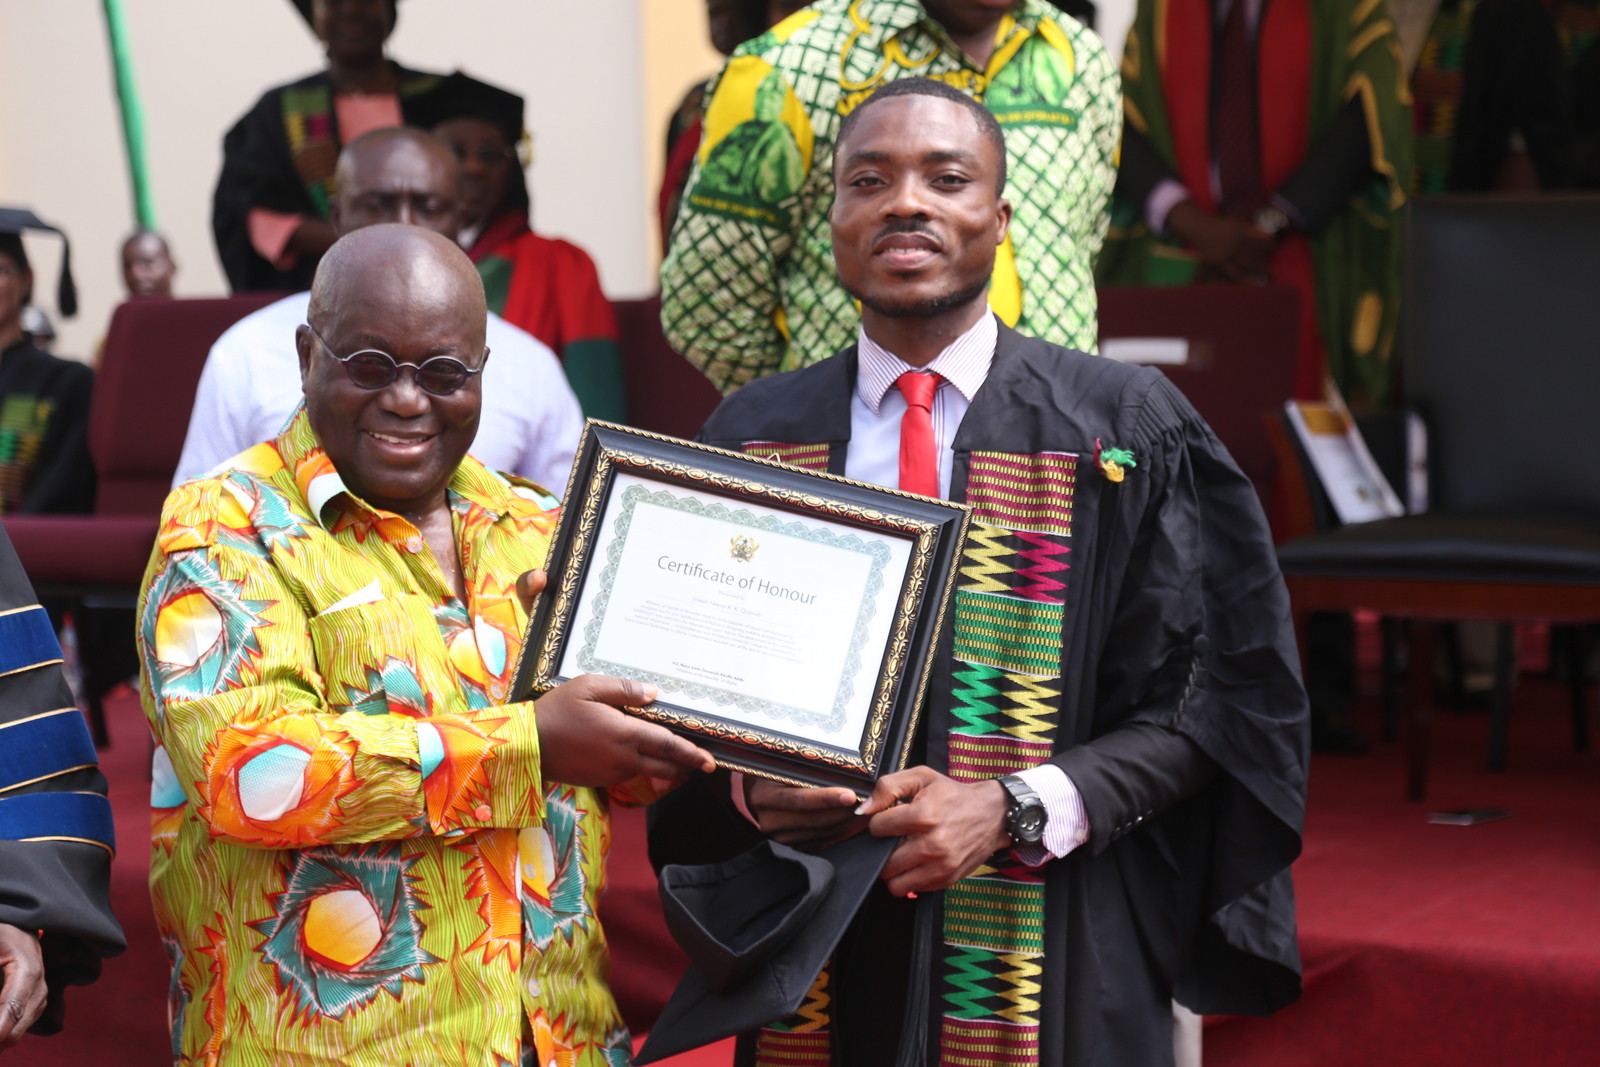 President Akufo-Addo presenting a citation to one of the students responsible for the launch of Ghana's first satellite into space